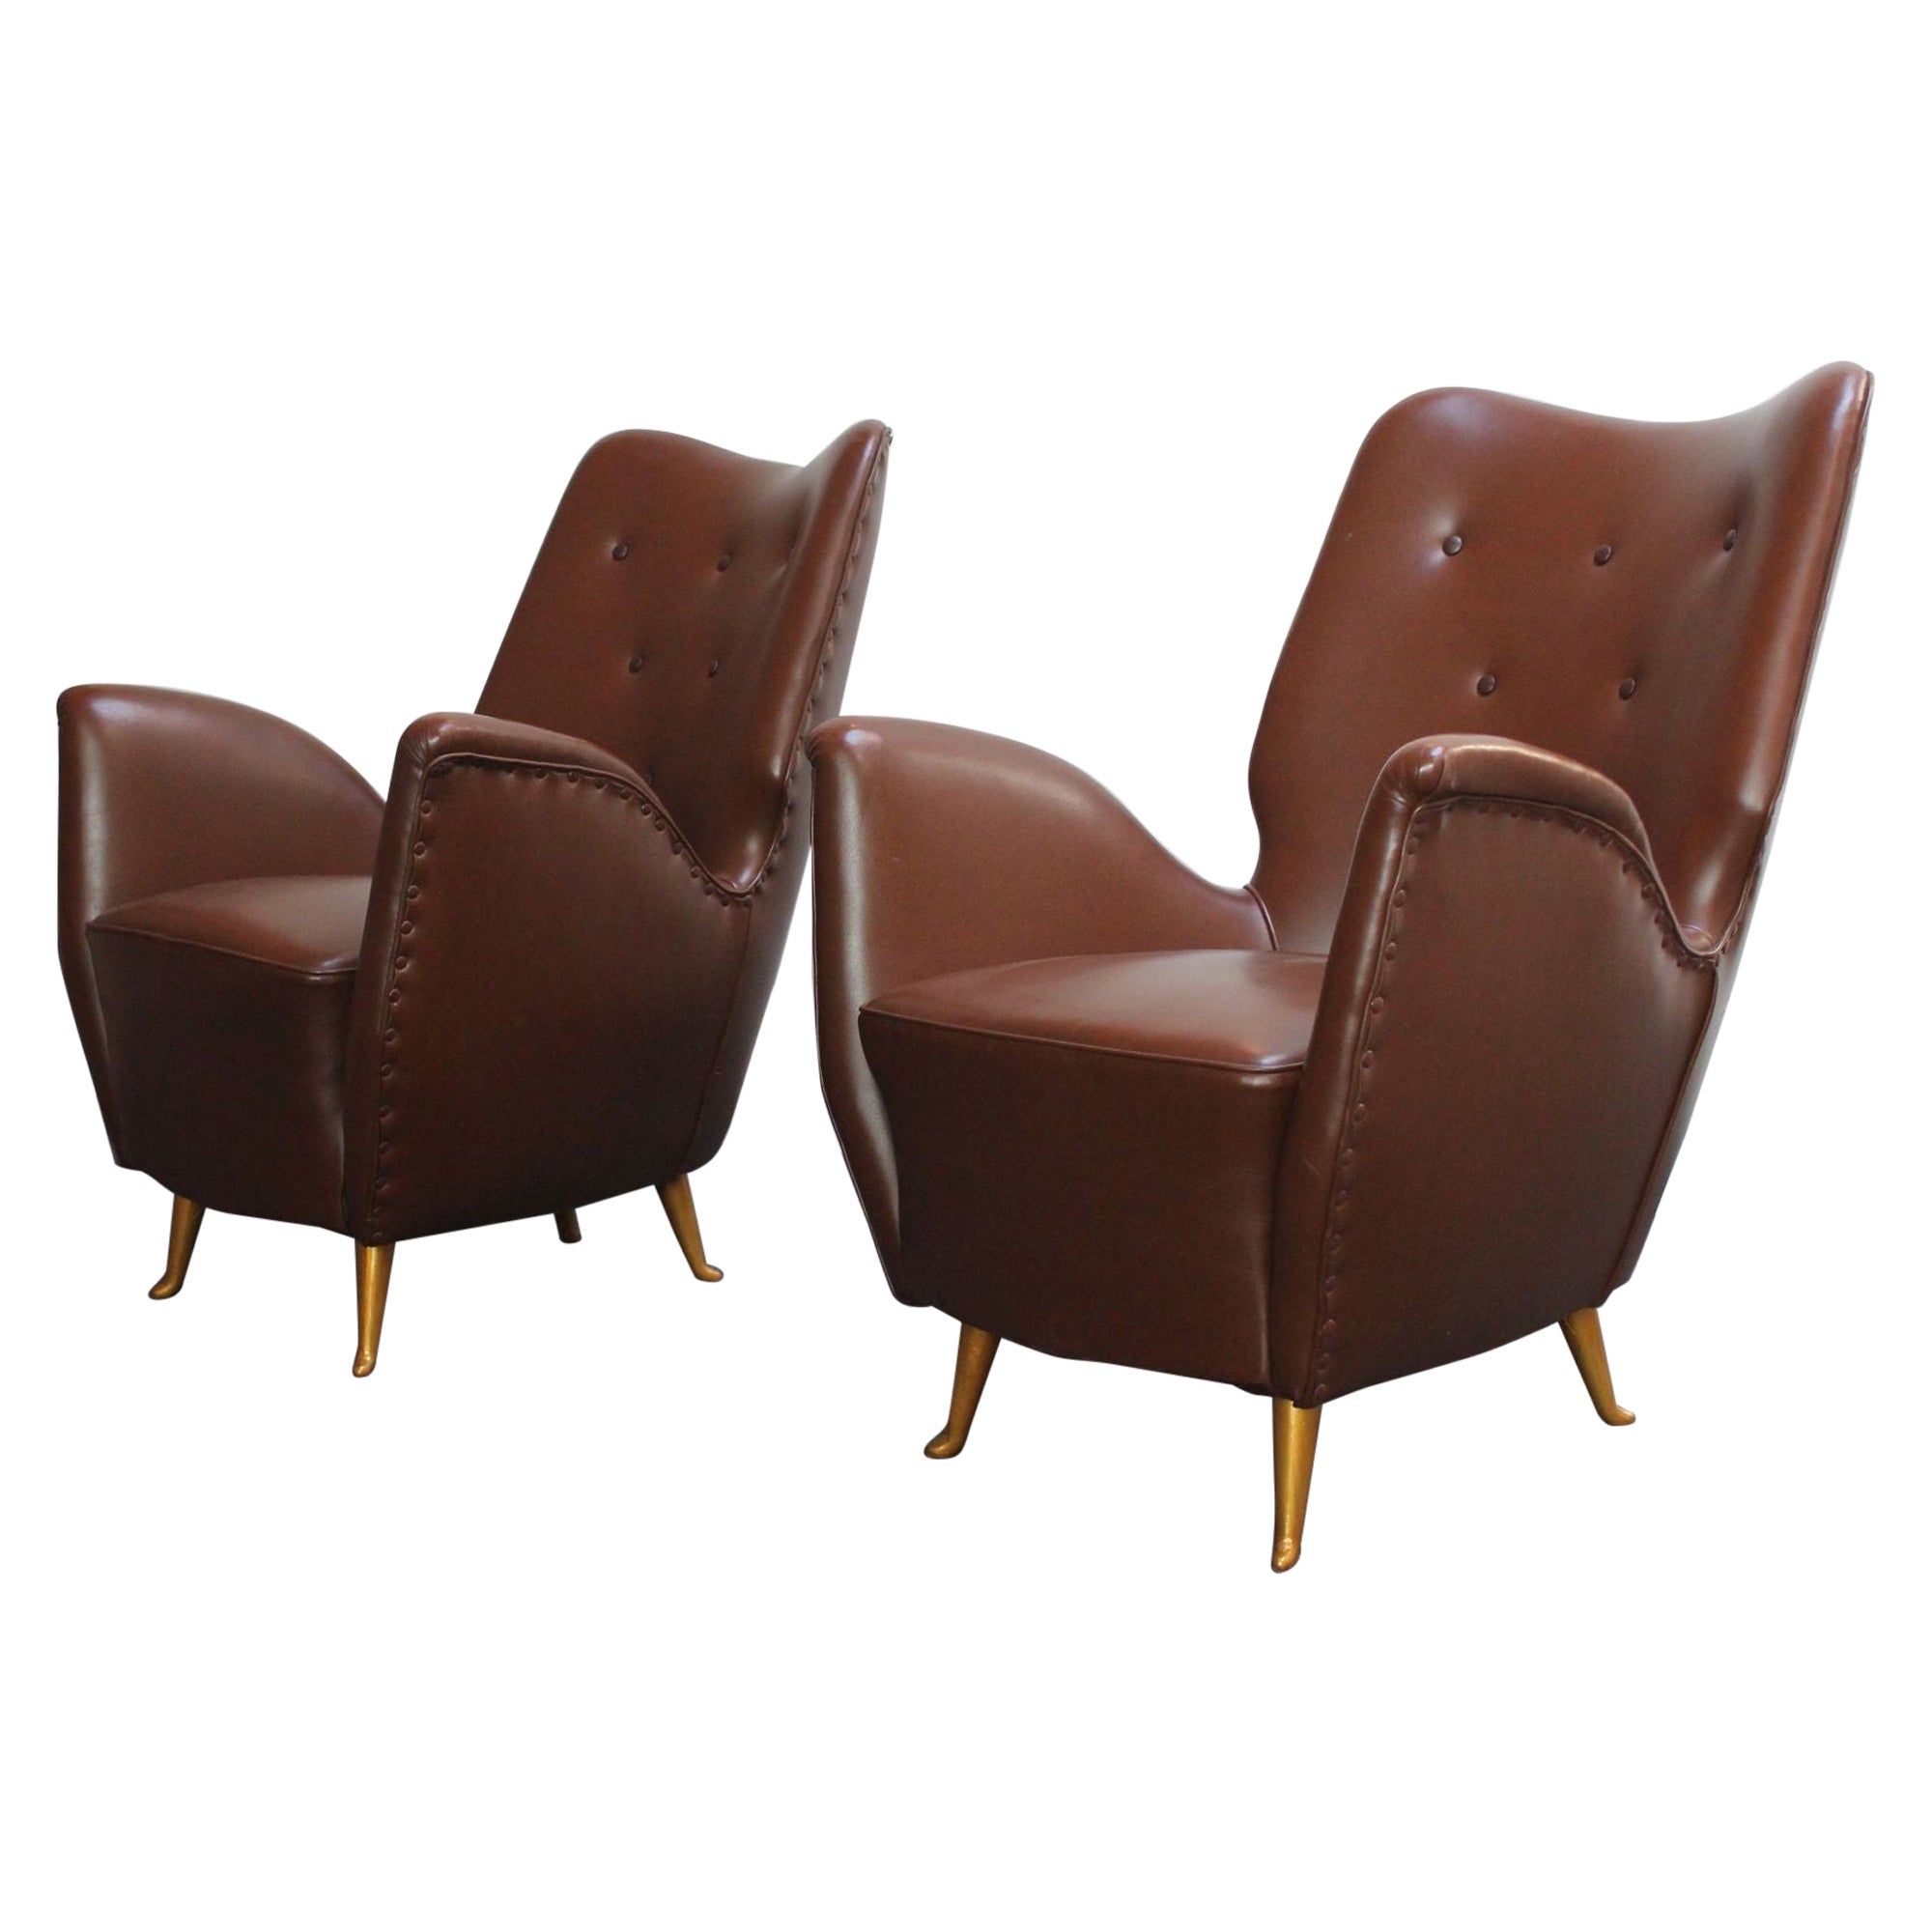 Pair of Isa Bergamo Sculptural Petite Club Chairs Attributed to Gio Ponti For Sale